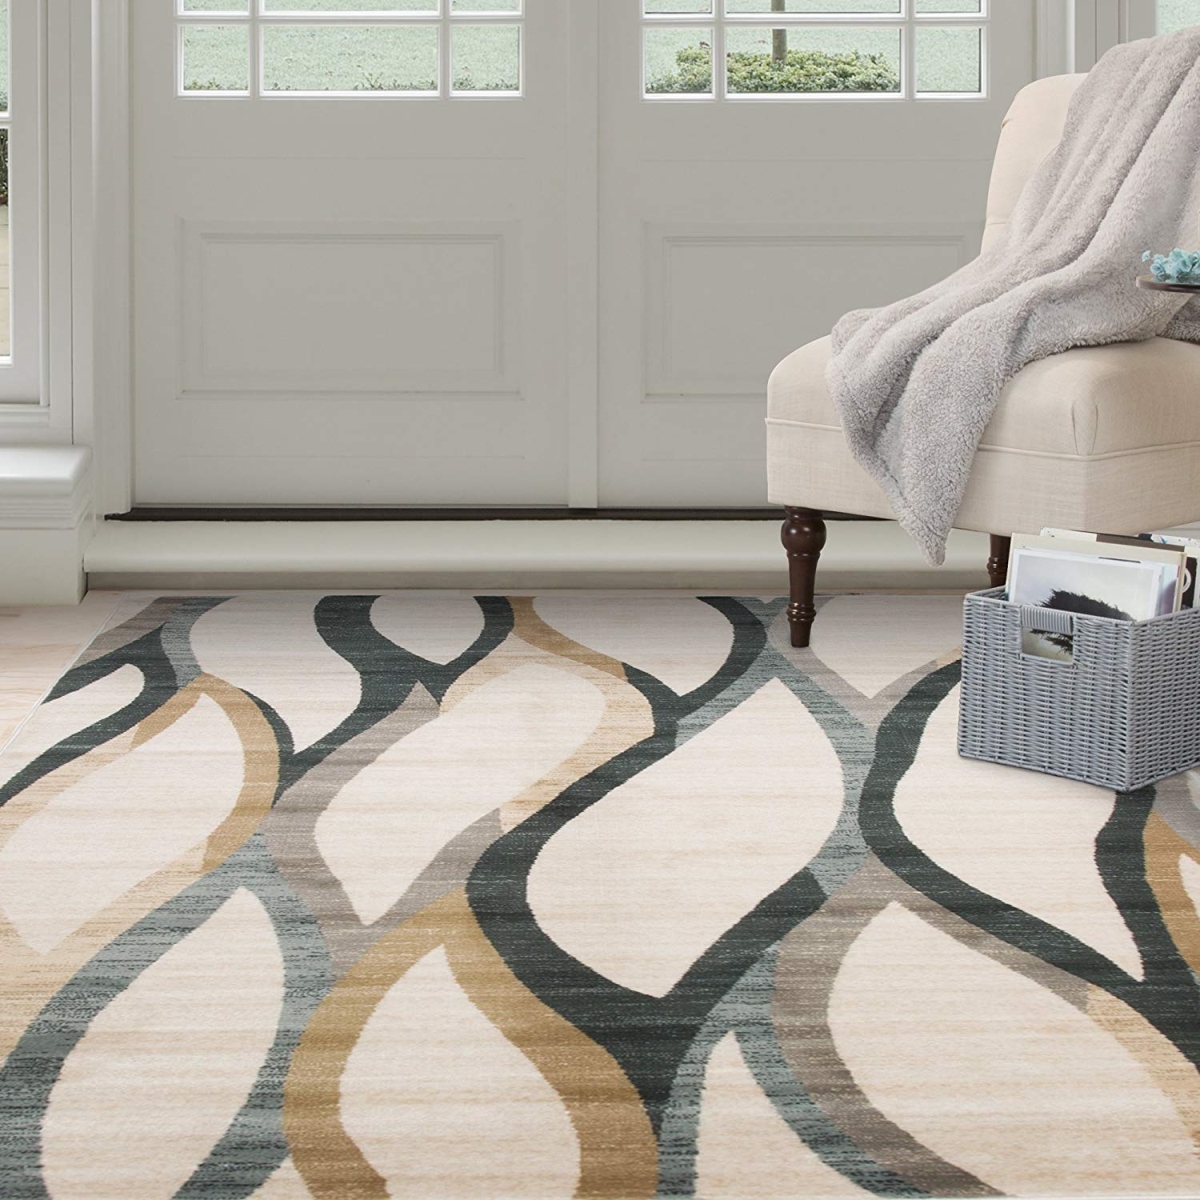 62a-26998 Opus Contemporary Curves Area Rug, 5 Ft. 3 In. X 7 Ft. 7 In. - Cream